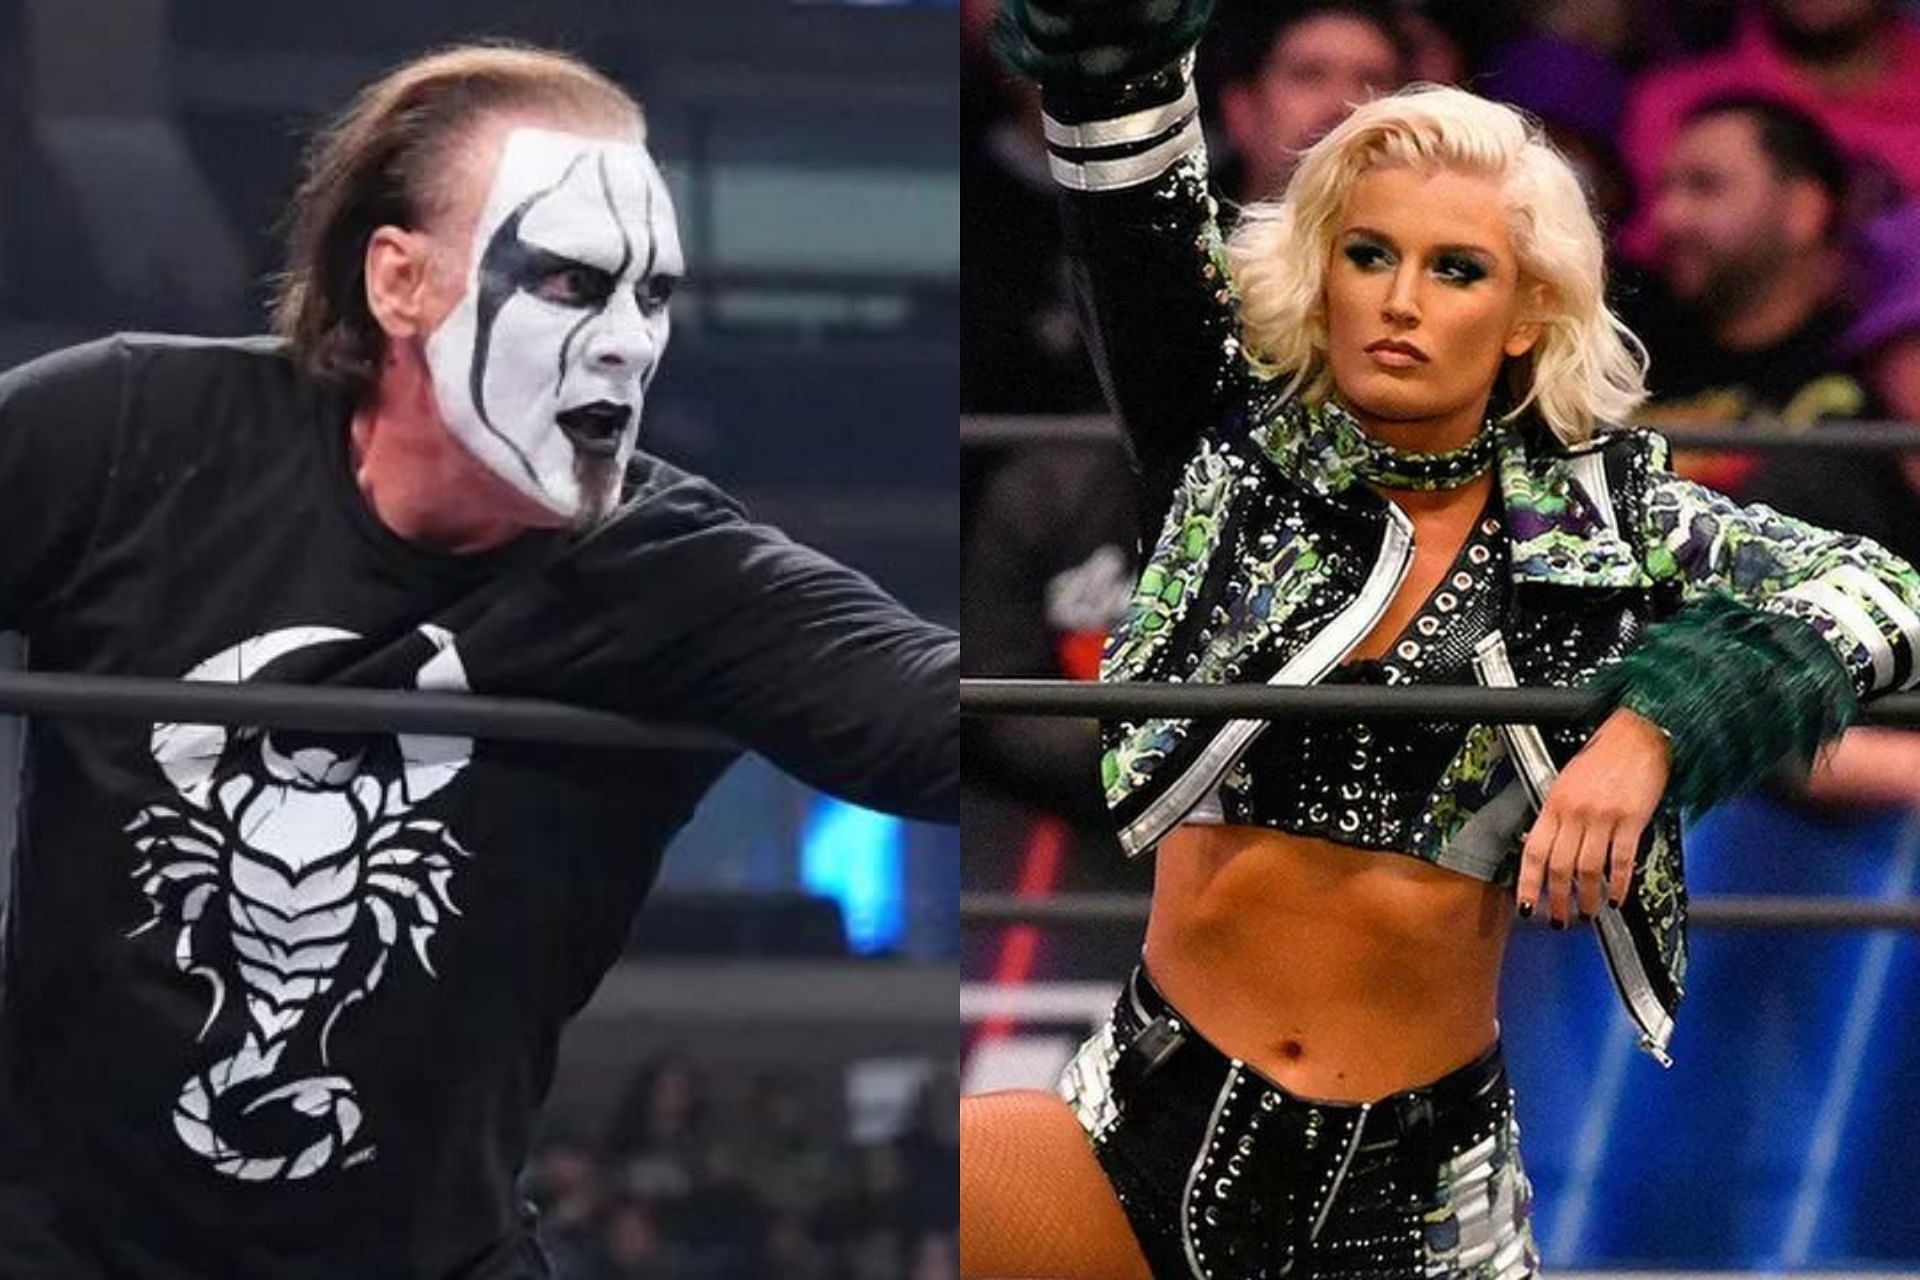 These wrestlers excelled in AEW, and not as much in WWE